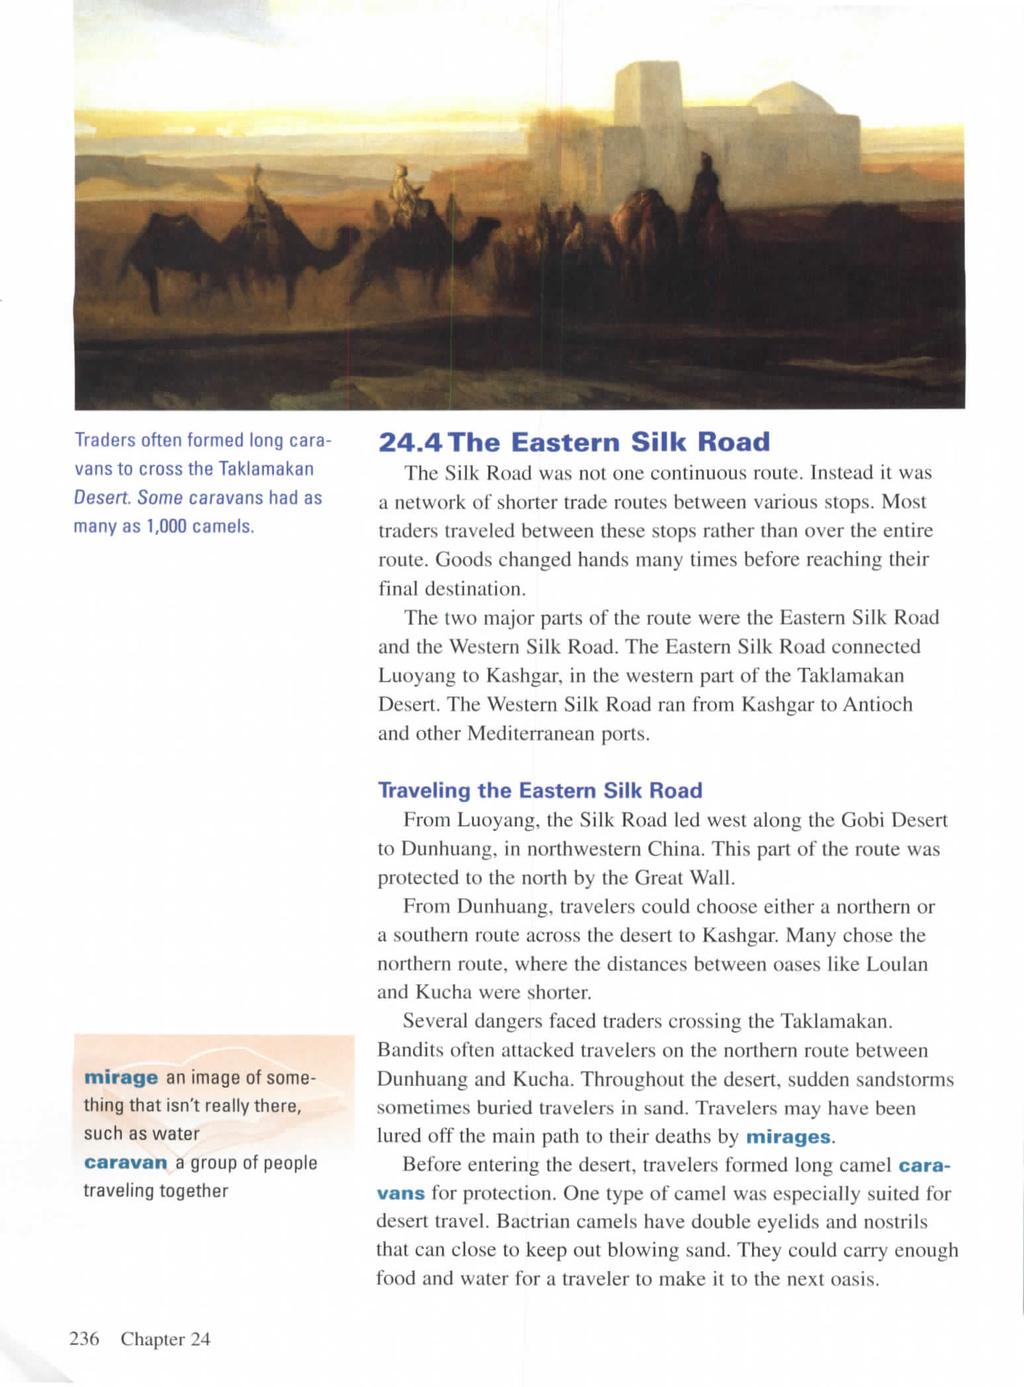 Traders often formed long caravans to cross the Taklamakan Desert. Some caravans had as many as 1,000 camels. 24.4 The Eastern Silk Road The Silk Road was not one continuous route.